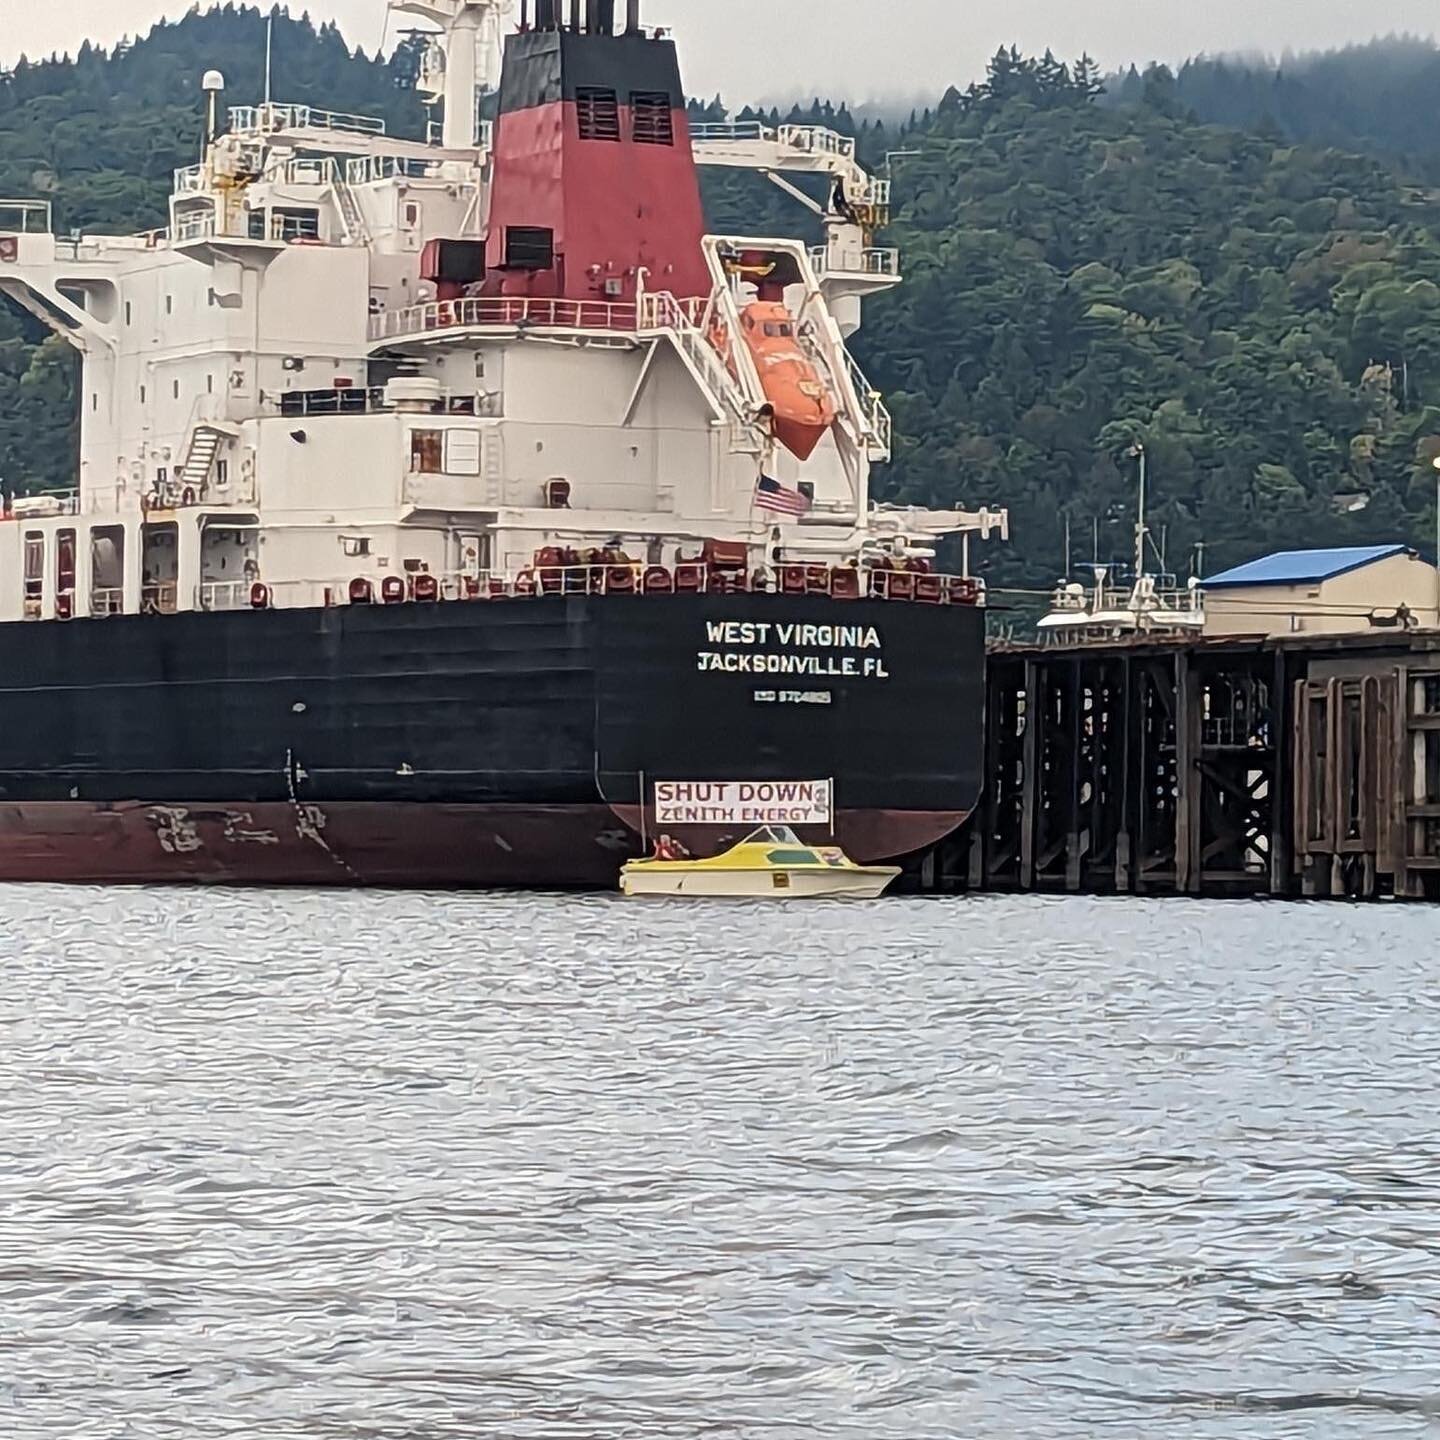 🚨 Breaking news 🚨- action on the water! Three folks in a motor boat have dropped anchor in front of a vessel from Zenith Energy, preventing the ship from exporting crude oil from the CEI (Critical Energy Infrastructure) Hub.

#stopzenith #endtheera